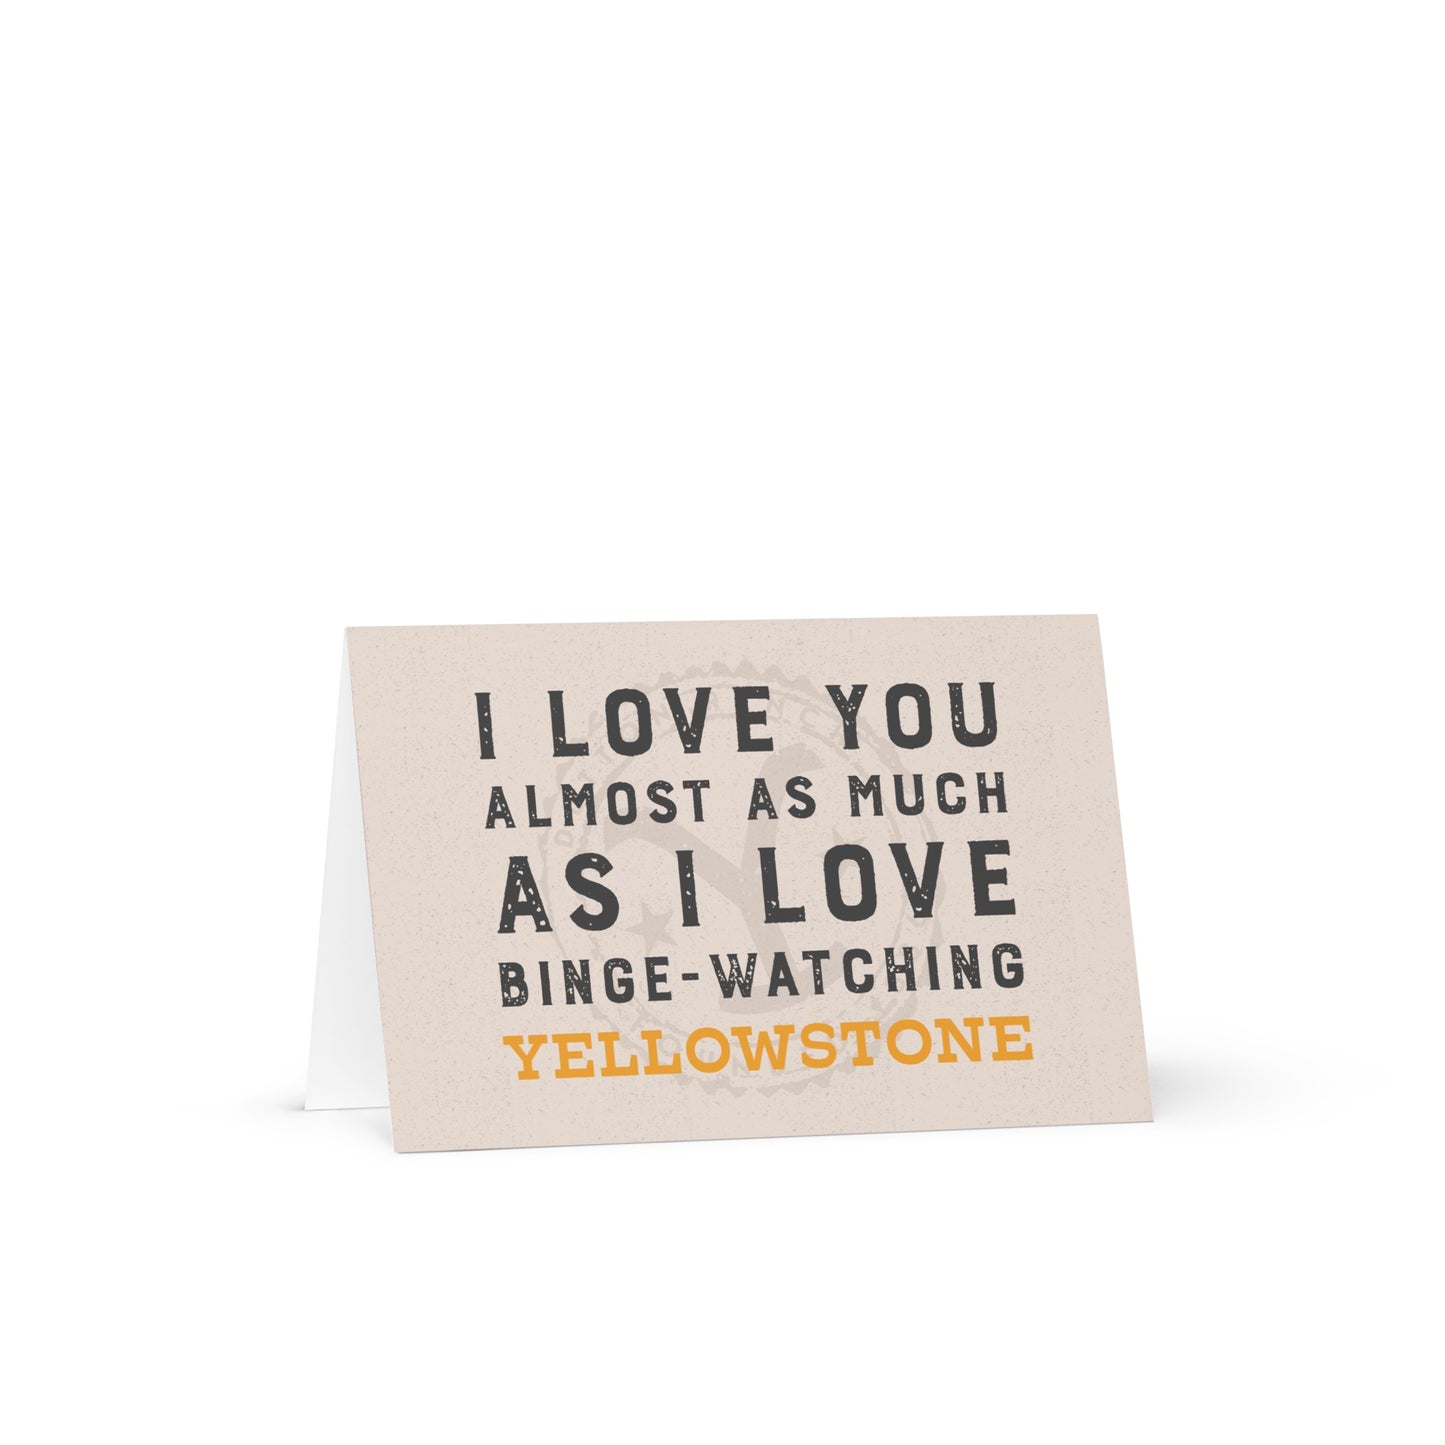 Yellowstone I Love You Almost As Much Greeting Card